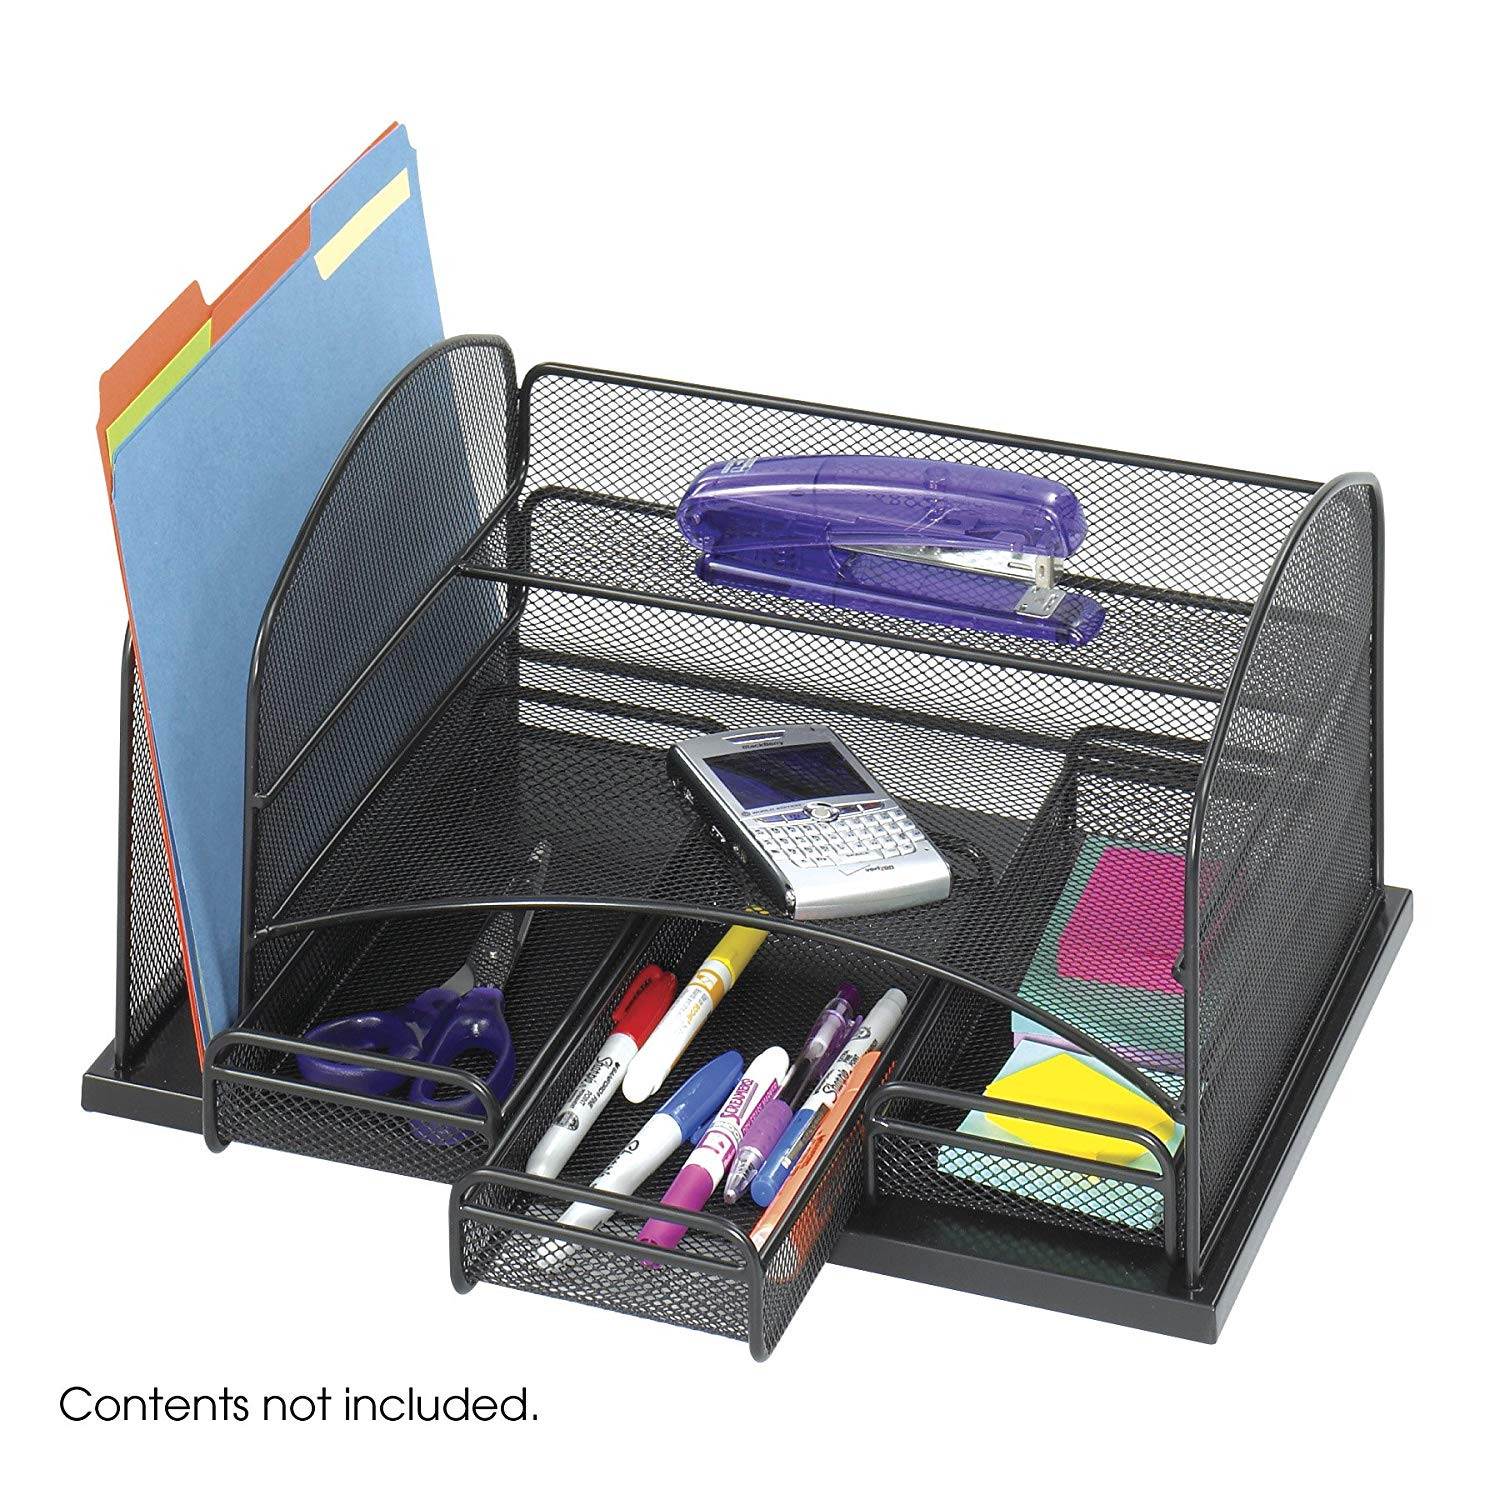 Desk Drawer Organizer Ideas
 Safco Products yx Mesh Desk Organizer with 3 Drawers